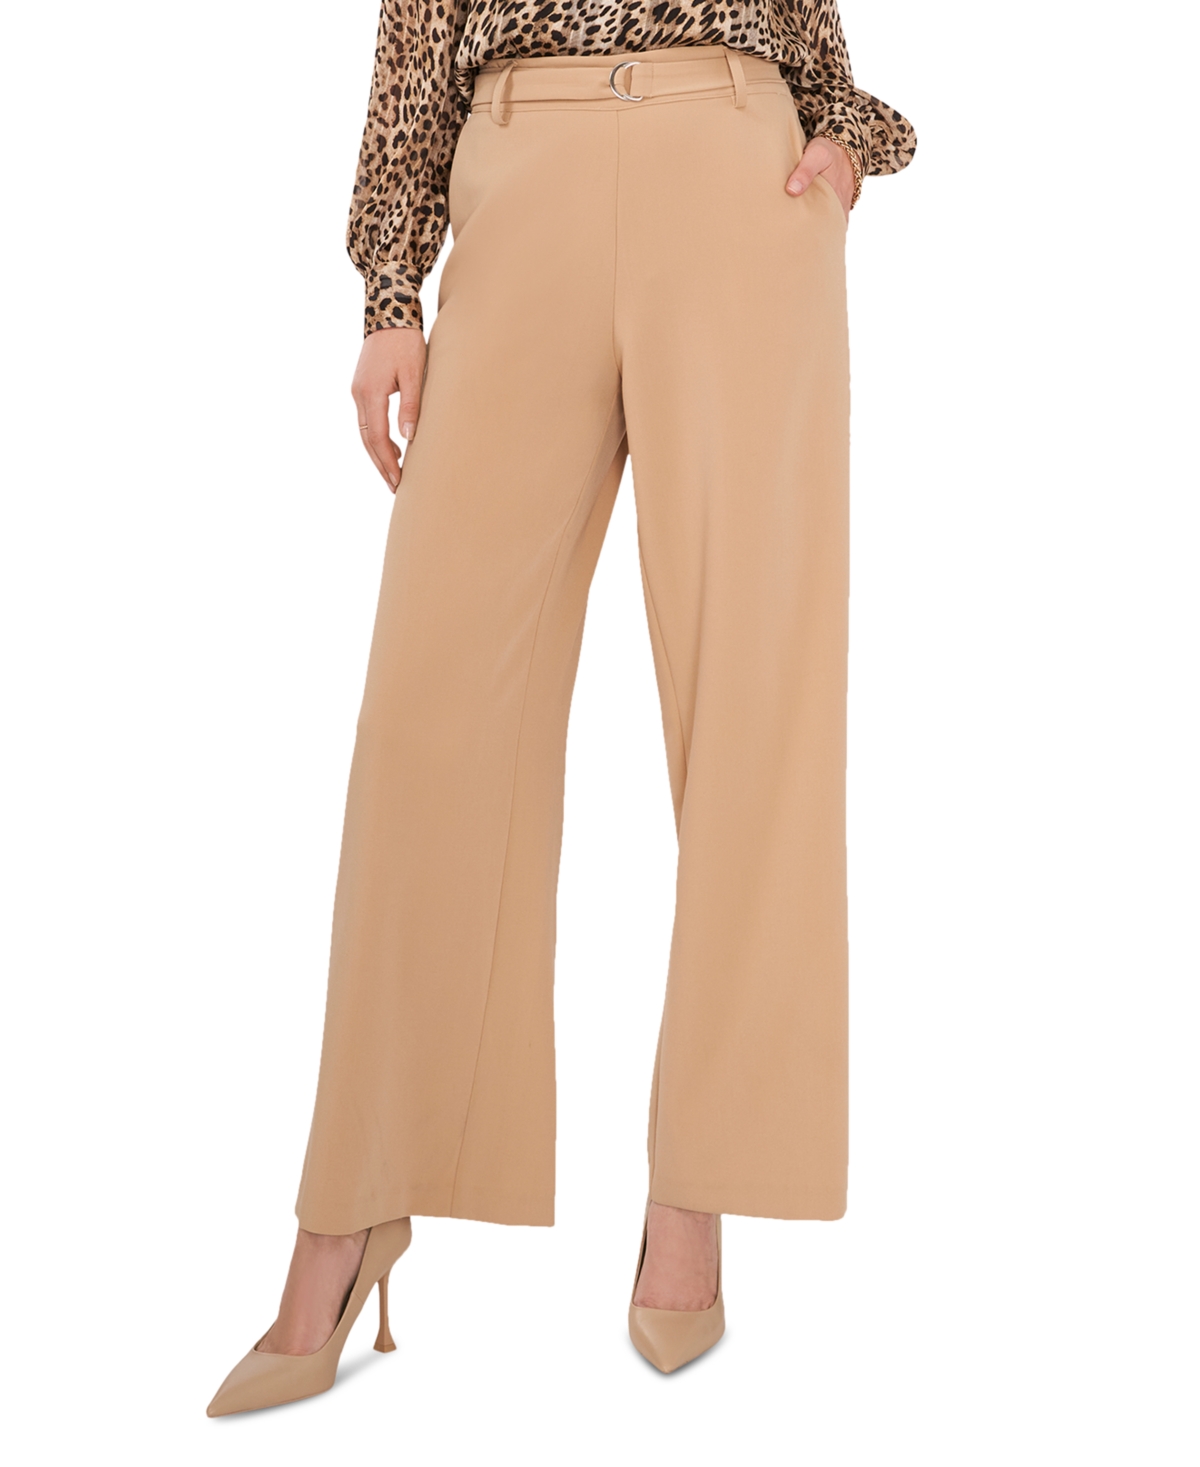 Vince Camuto Women's Belted Straight-Leg Flared Pants